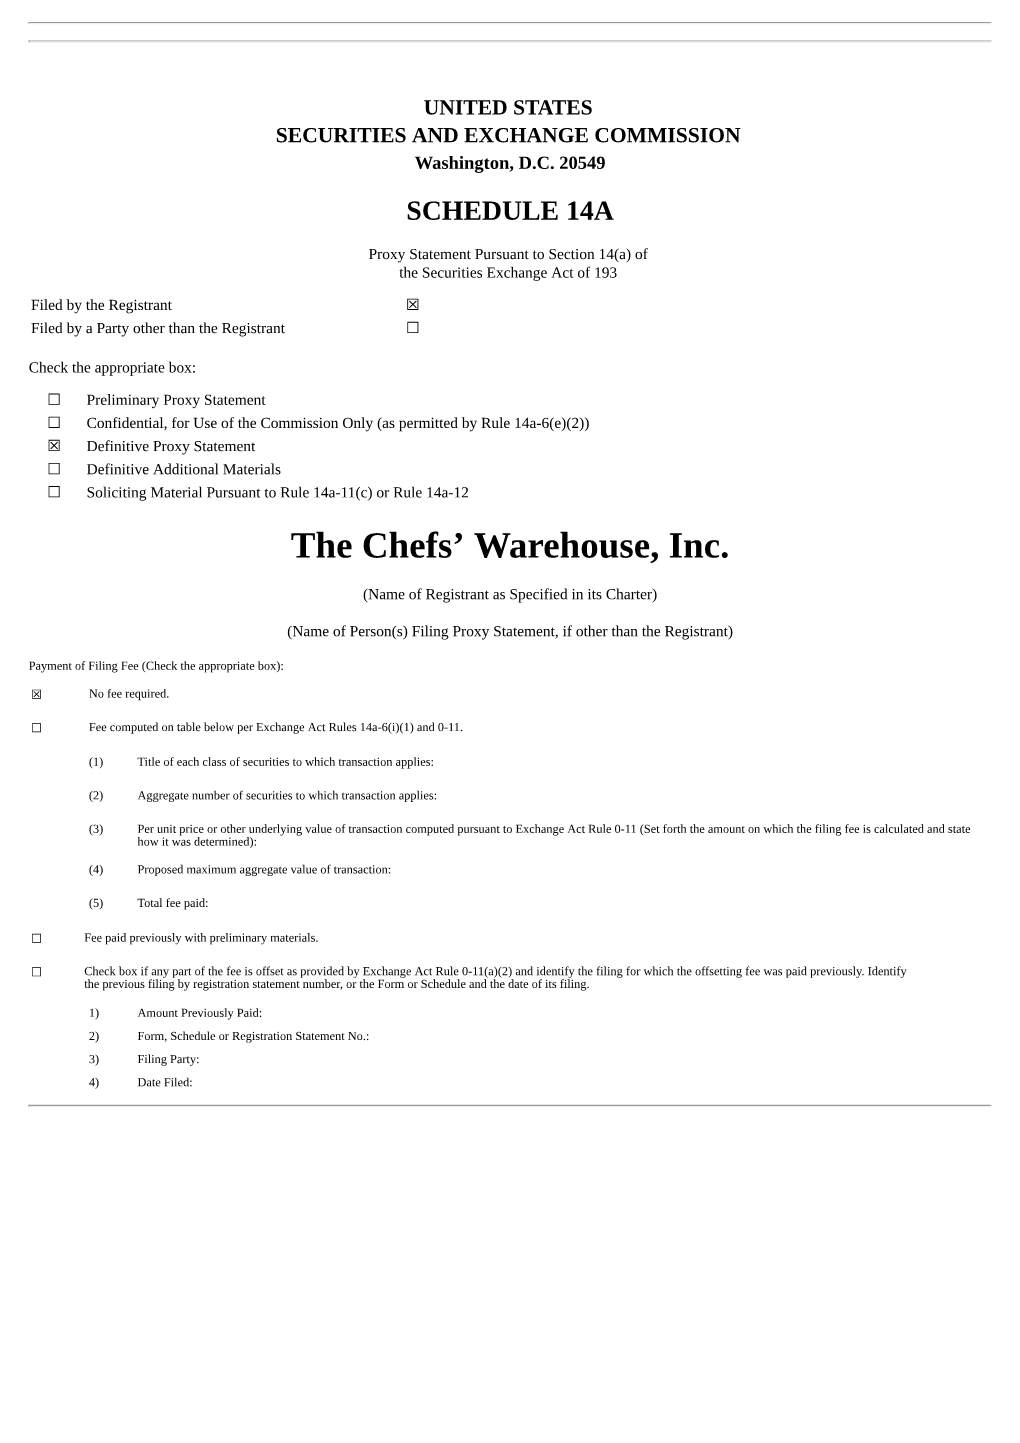 The Chefs' Warehouse, Inc